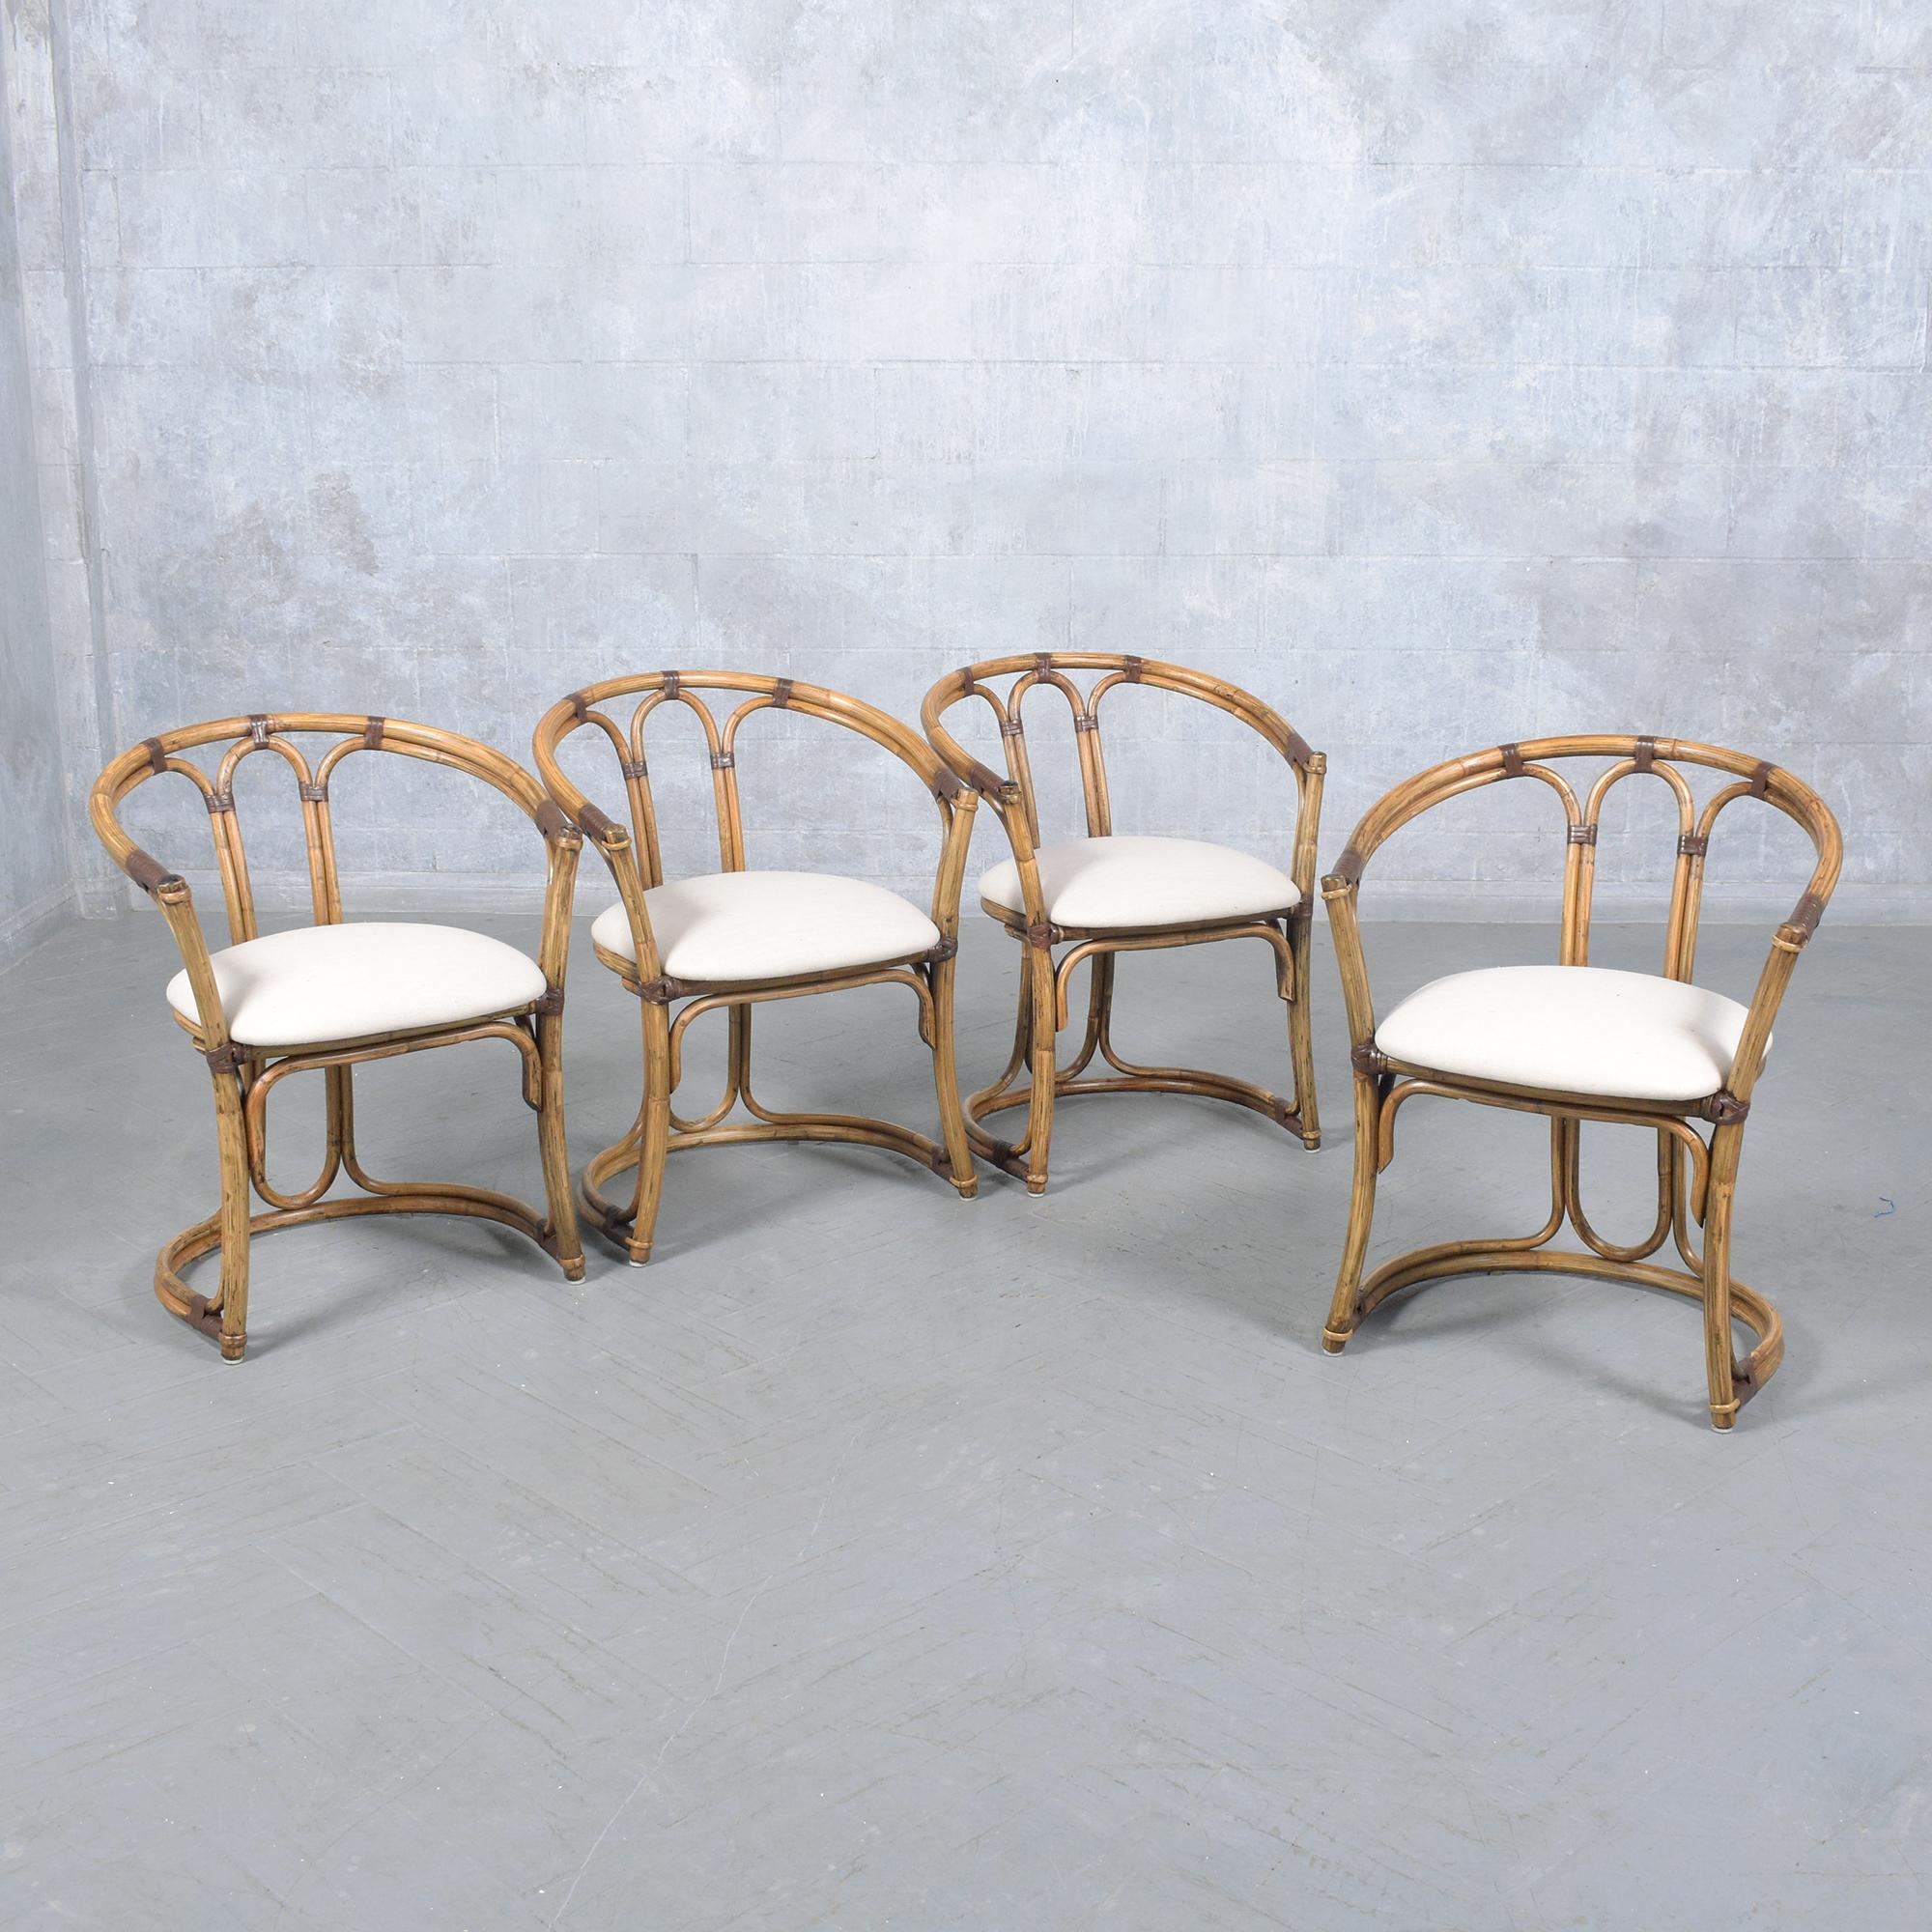 Organic Modern Set of Four Restored Vintage Bamboo Barrel Chairs with Ivory Upholstery For Sale